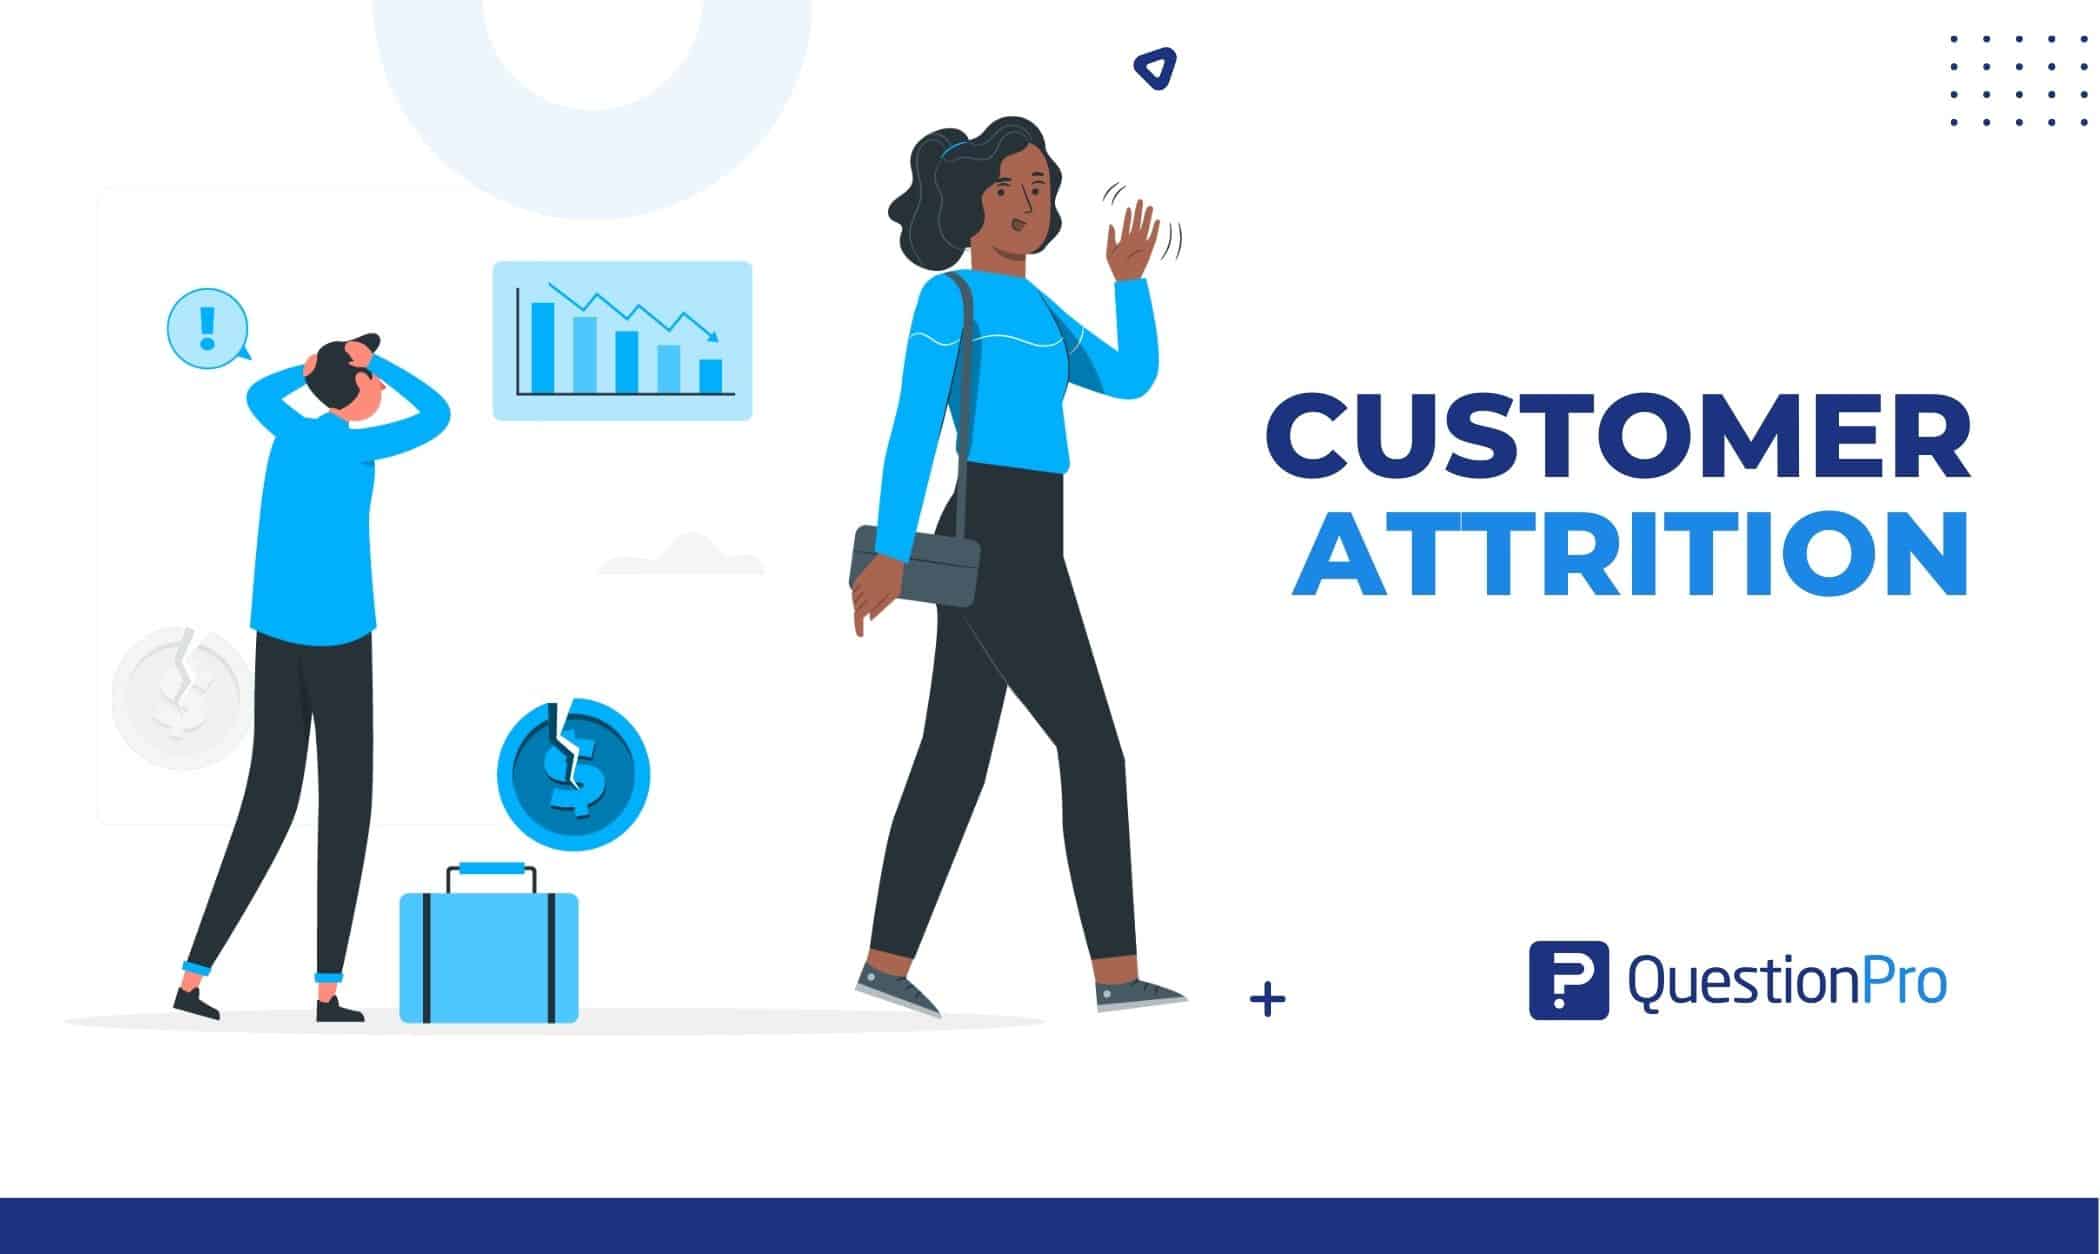 Customer attrition is the process through which a company loses customers over time. Read on to learn how to measure and reduce it.